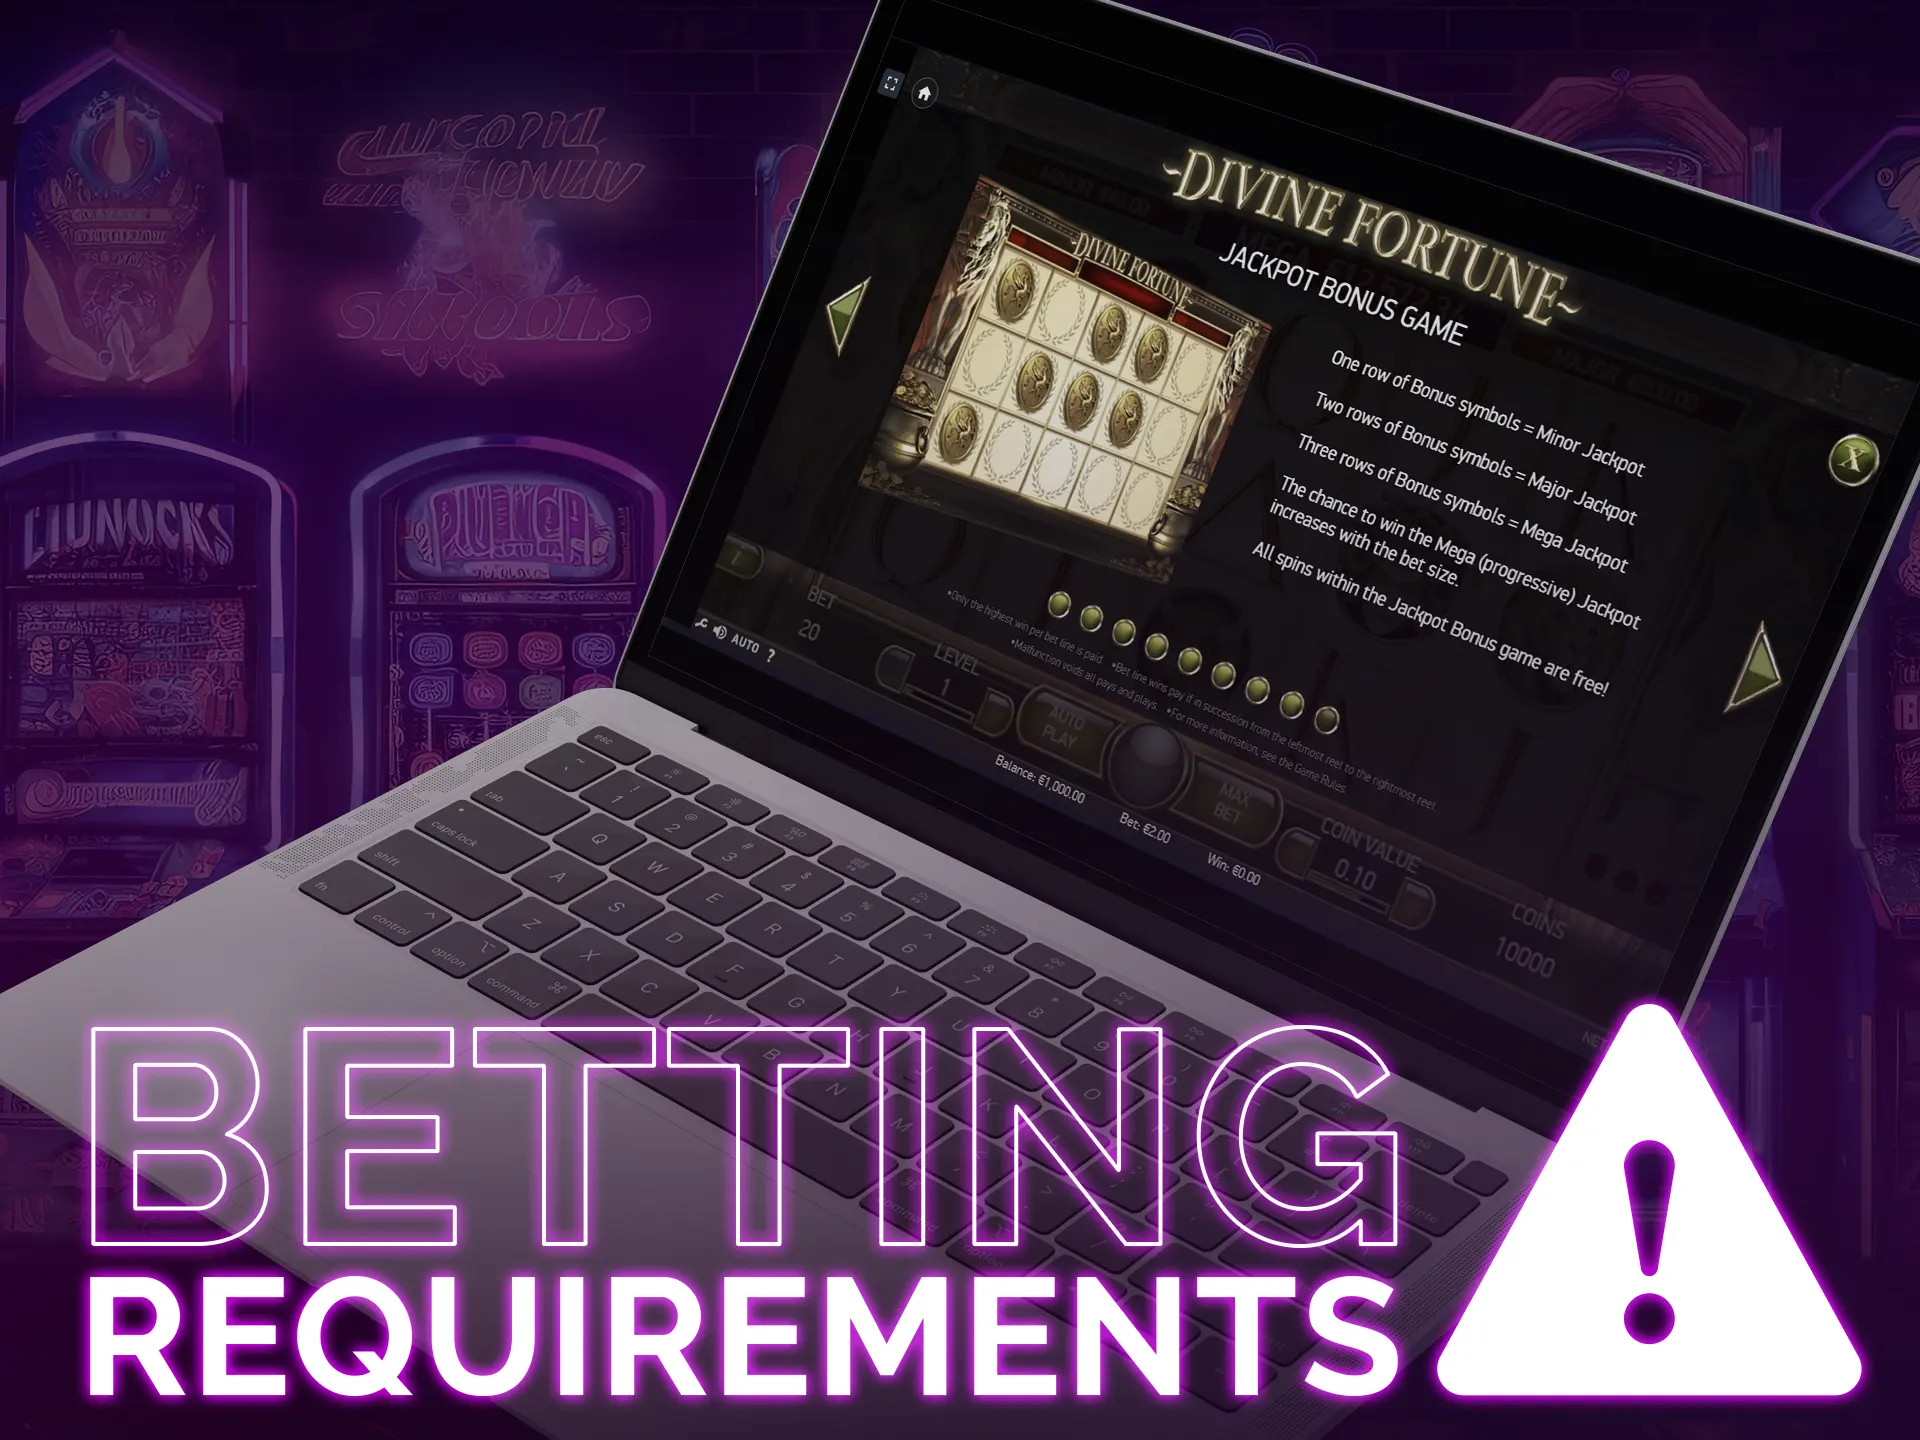 Slot machines may limit functions based on bet size adjustments.